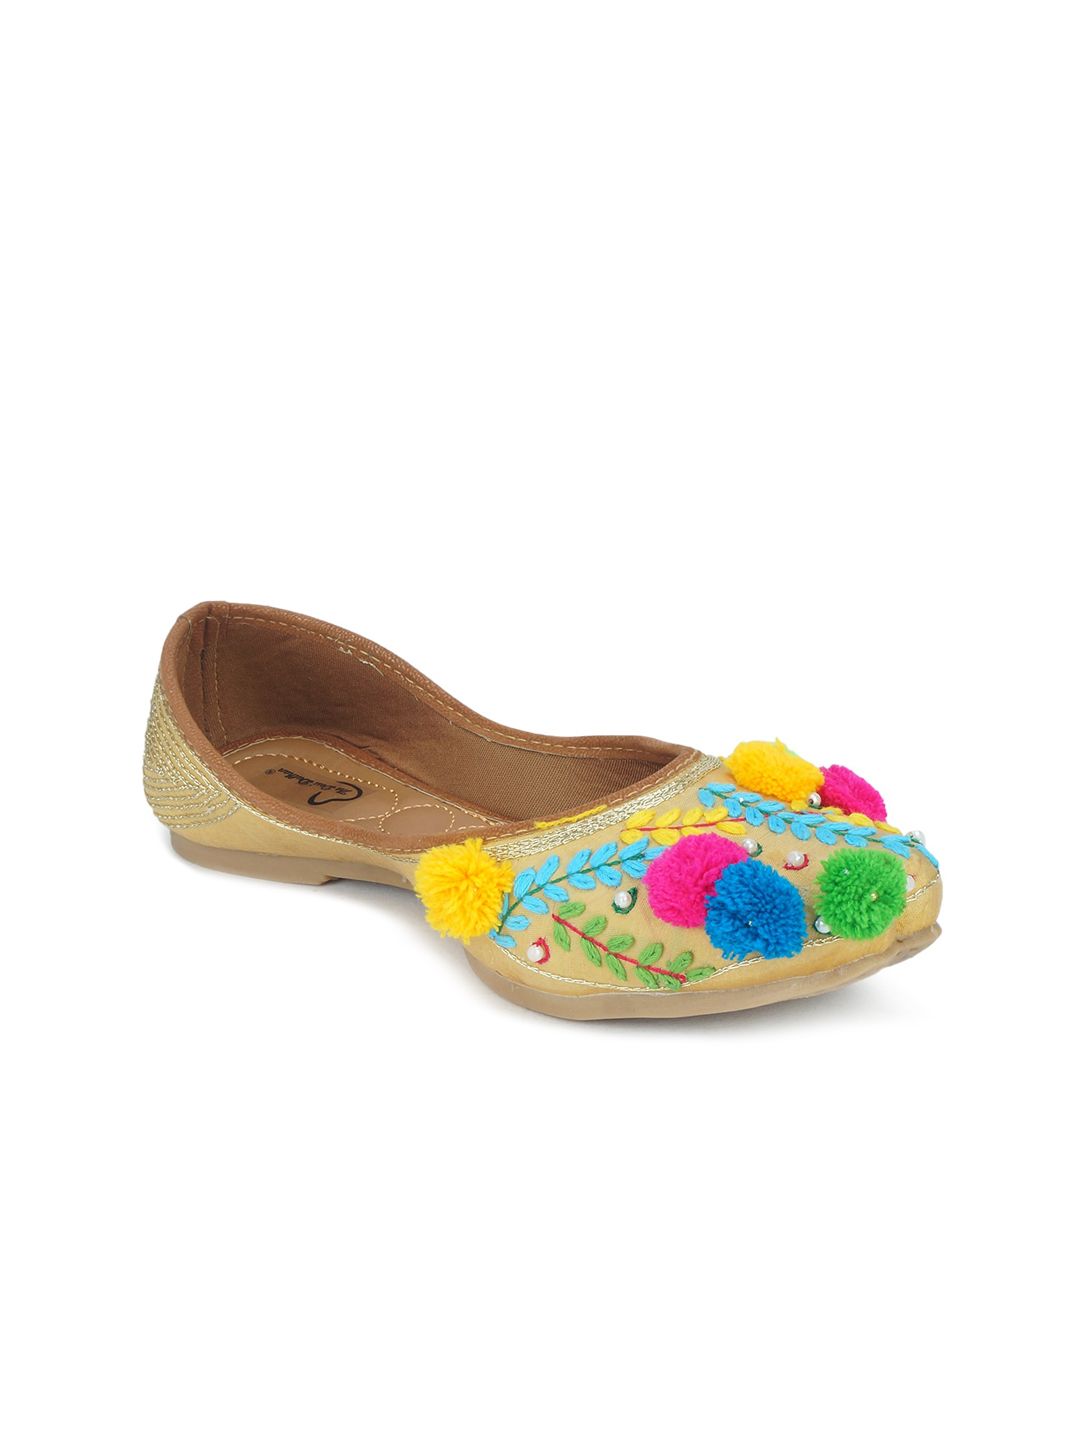 The Desi Dulhan Women Gold-Toned Embellished Leather Ethnic Mojaris with Embroidered Flats Price in India